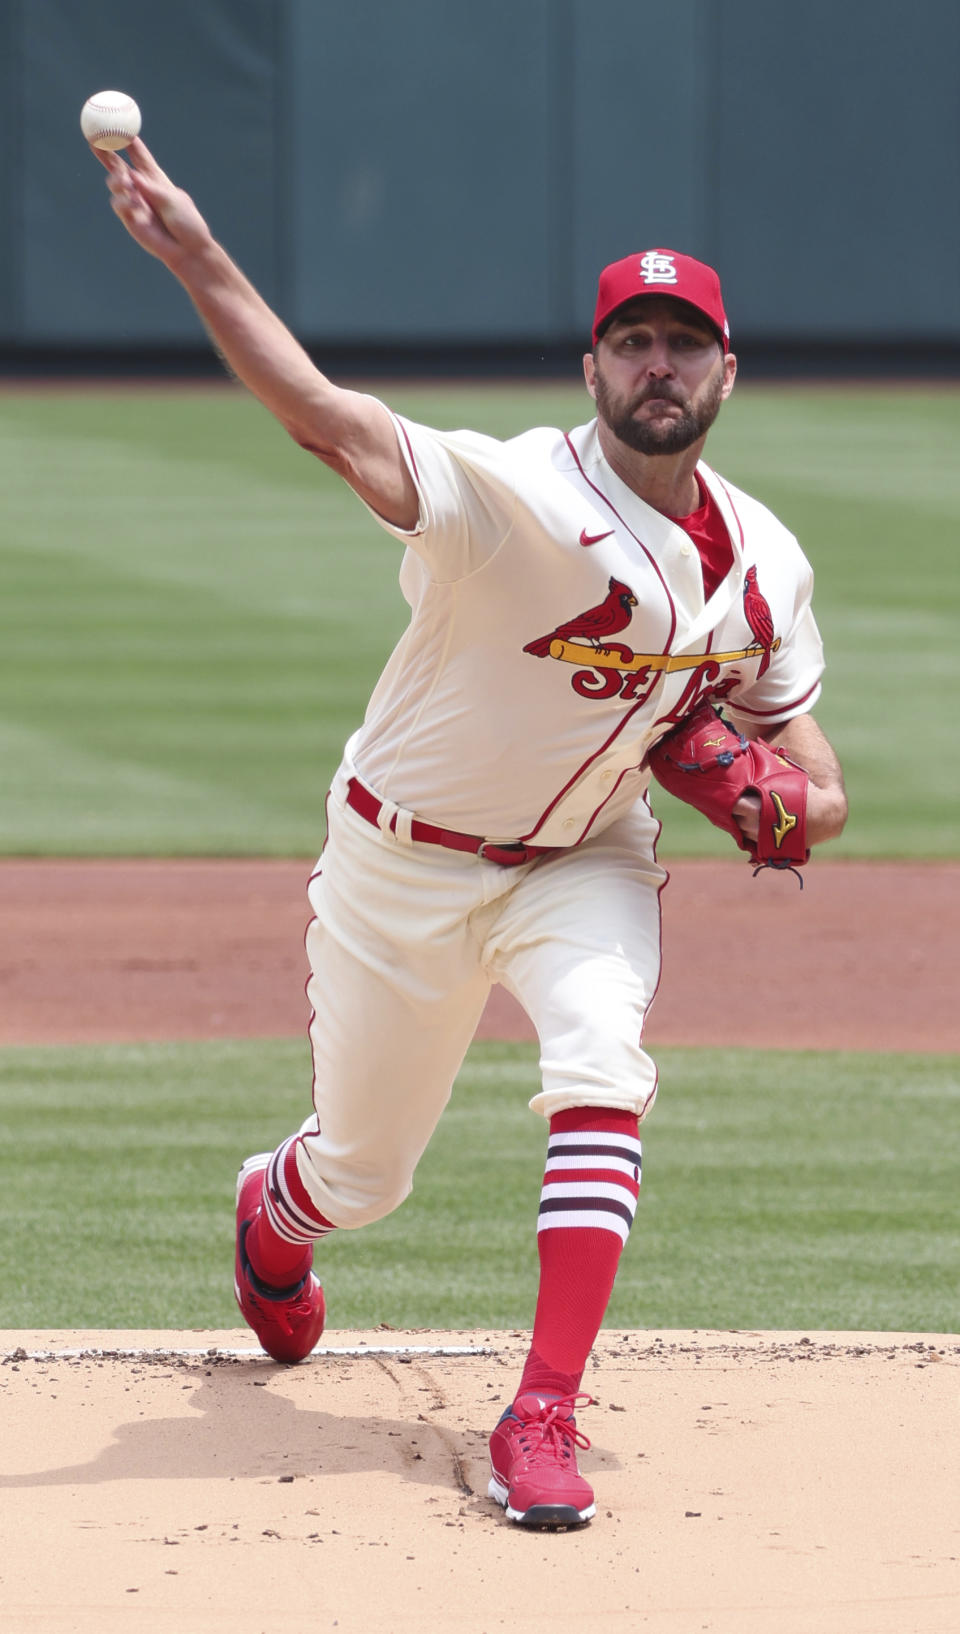 St. Louis Cardinals' starting pitcher Adam Wainwright delivers a pitch in the first inning of a baseball game against the Detroit Tigers, Saturday, May 6, 2023 in St. Louis. (AP Photo/Tom Gannam)